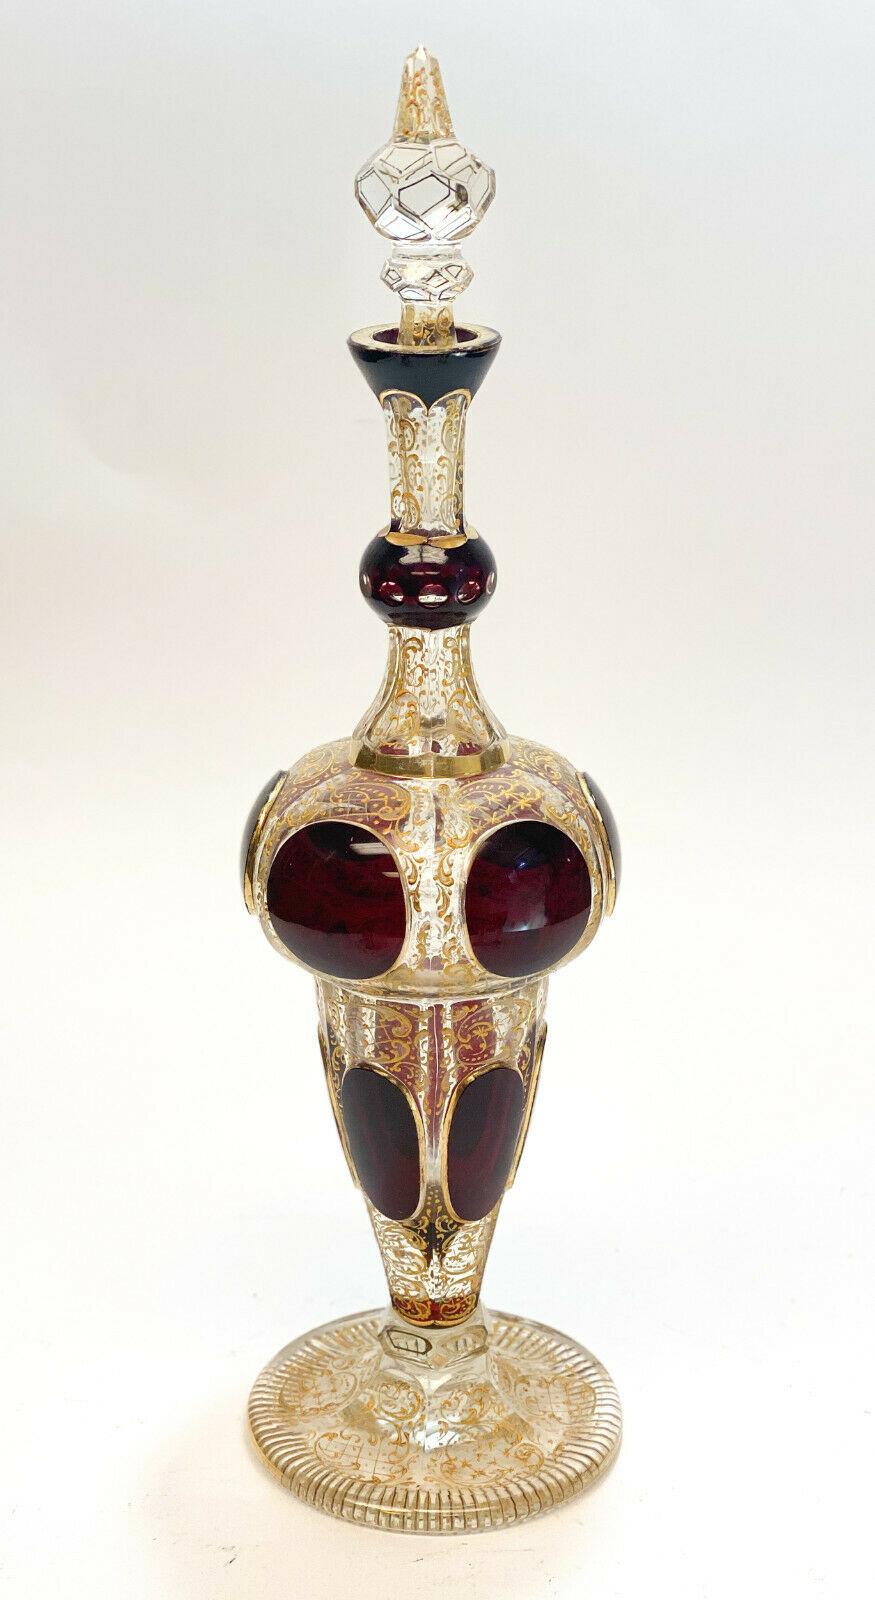 Moser cabochon & raised gilt garnet red to clear glass liquor set for 5, circa 1900. Gilt foliate scroll and beaded designs throughout with garnet red cabochon panels throughout the pieces. The liquor set includes a decanter and 5 cordial wine